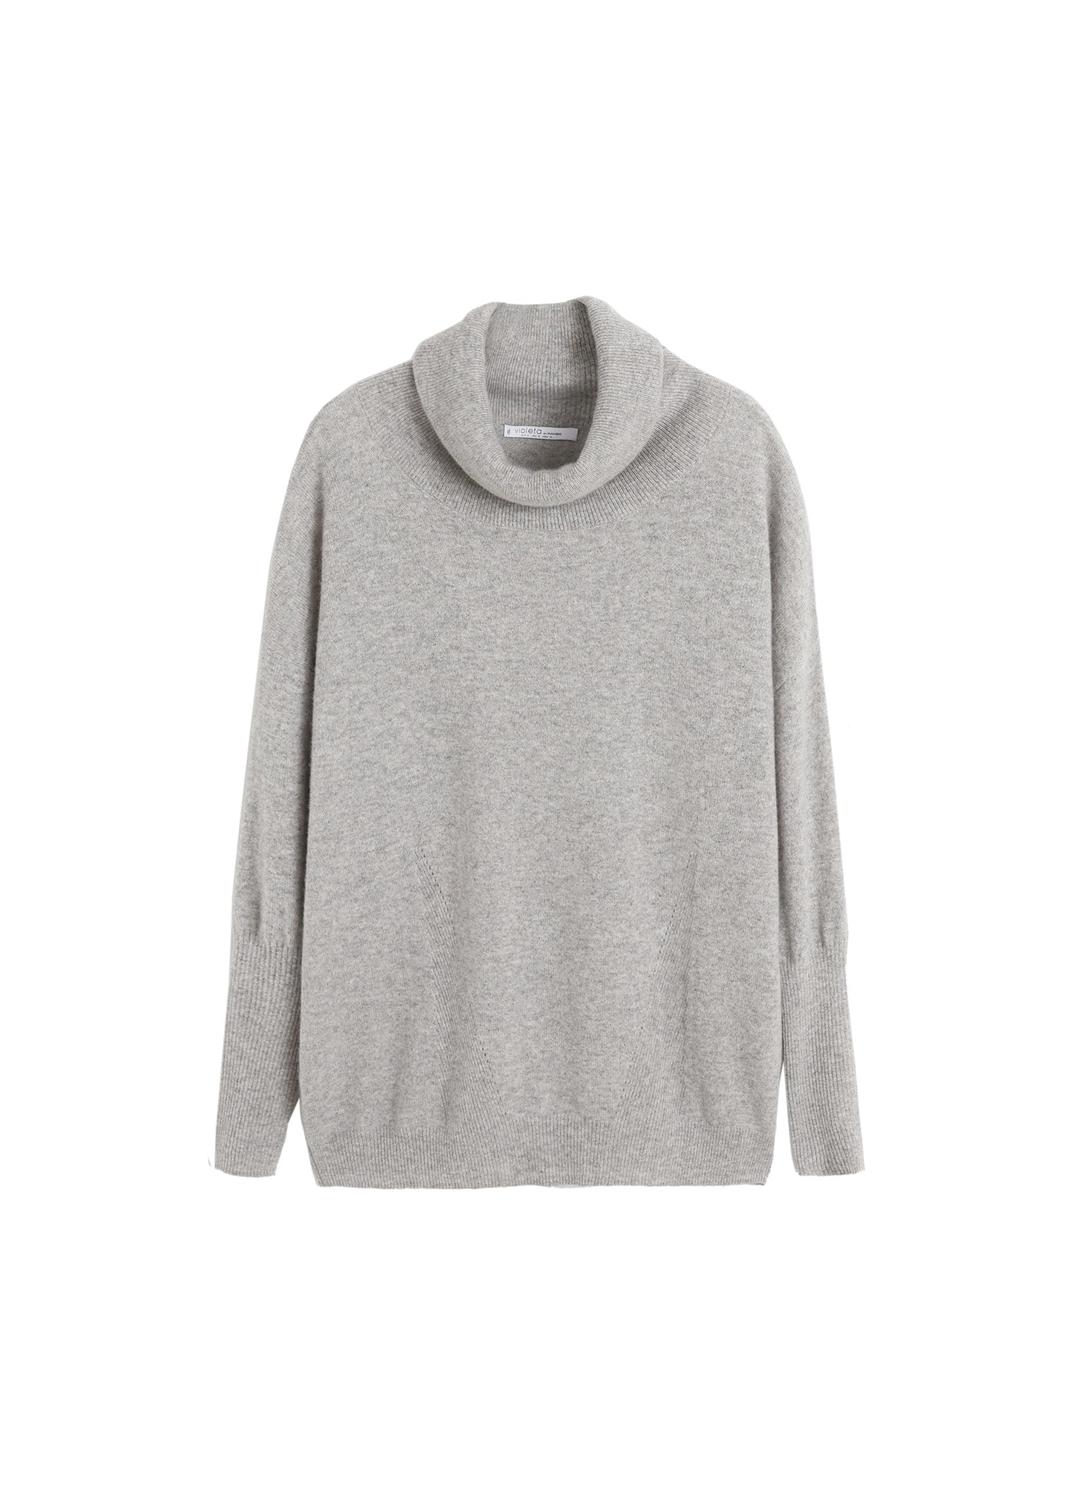 18 Affordable Cashmere Sweaters to Add to Your Closet | Who What Wear